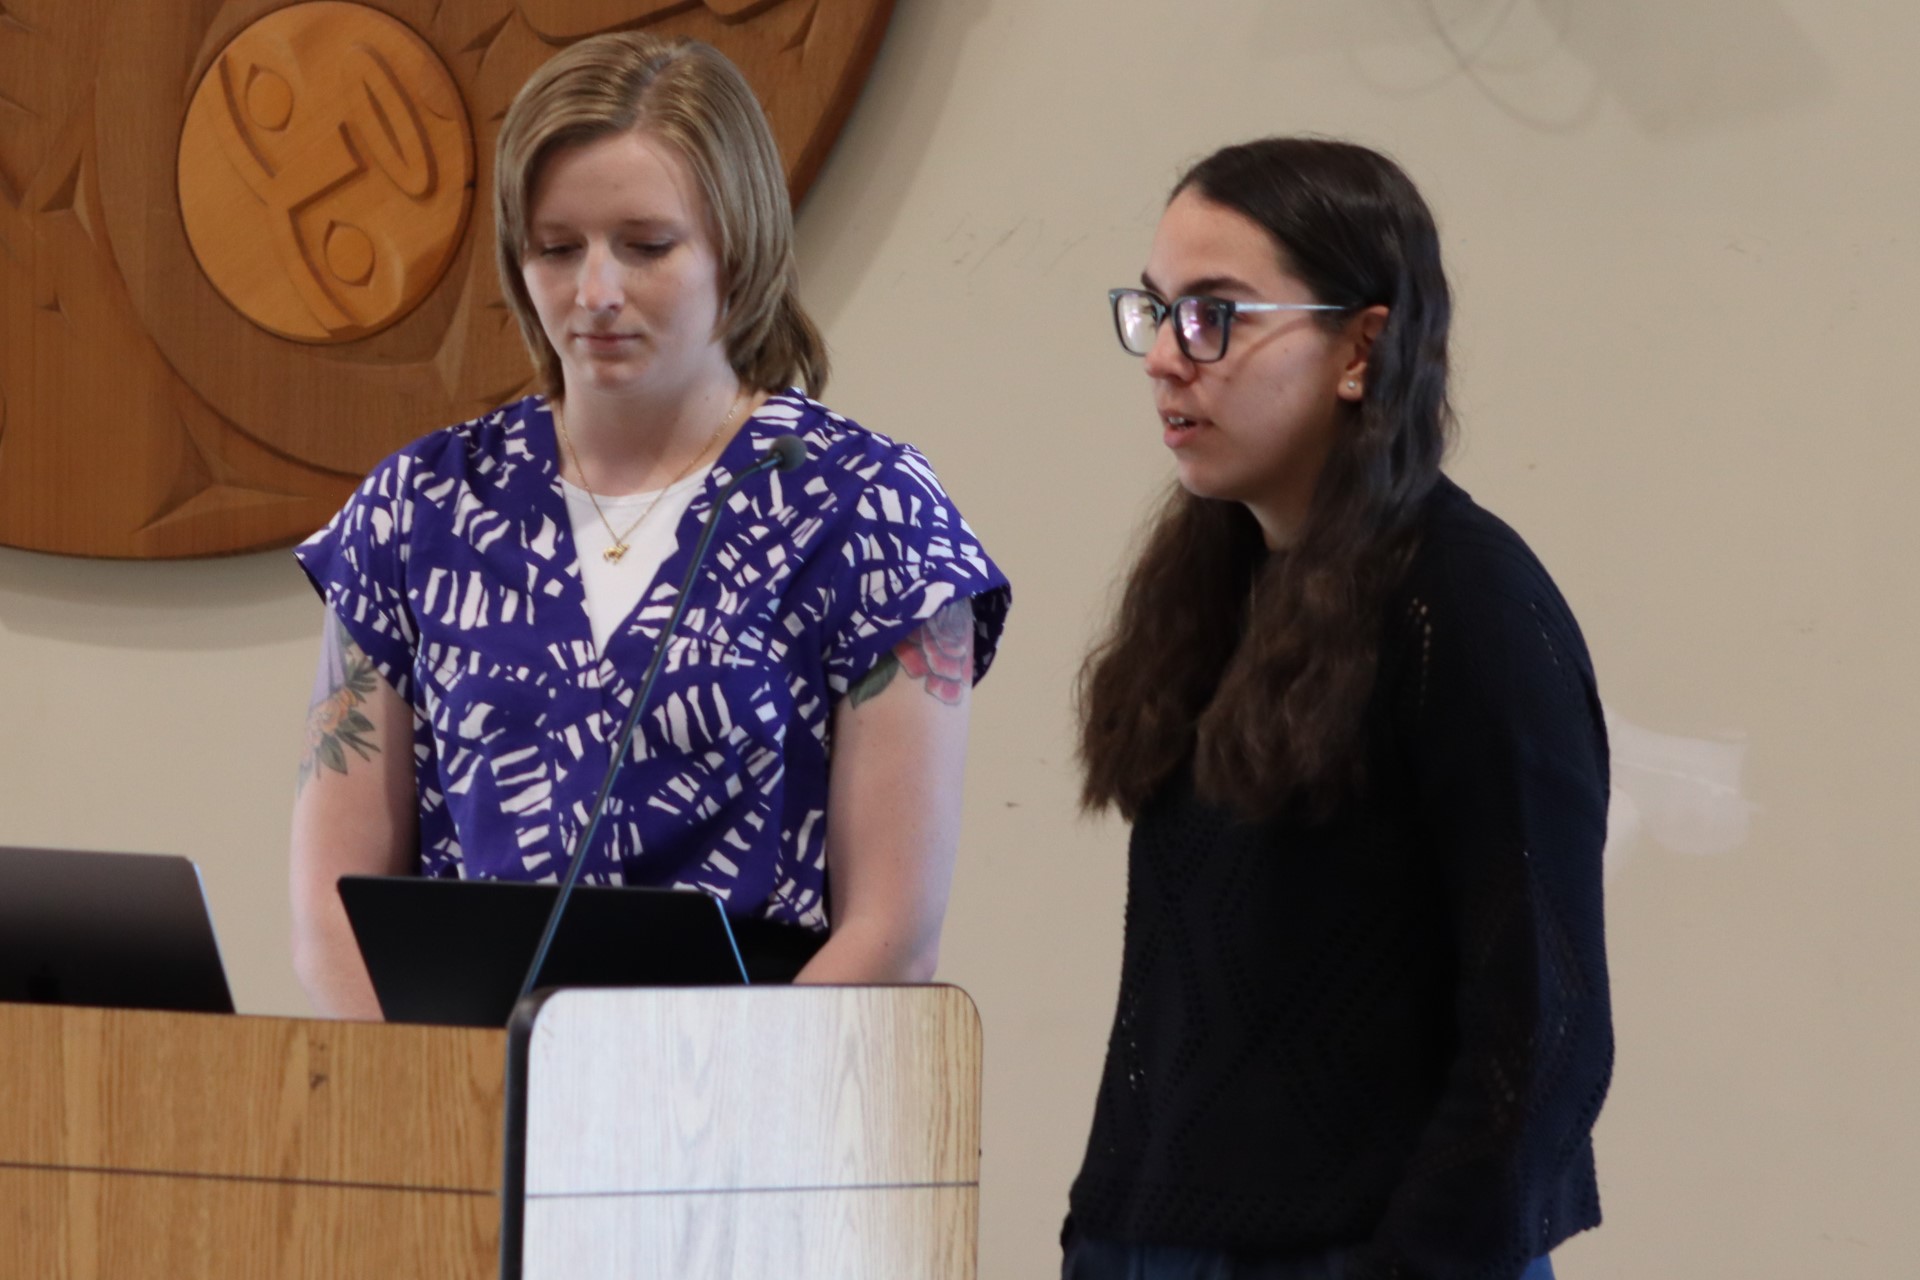 Two young woman at a lectern